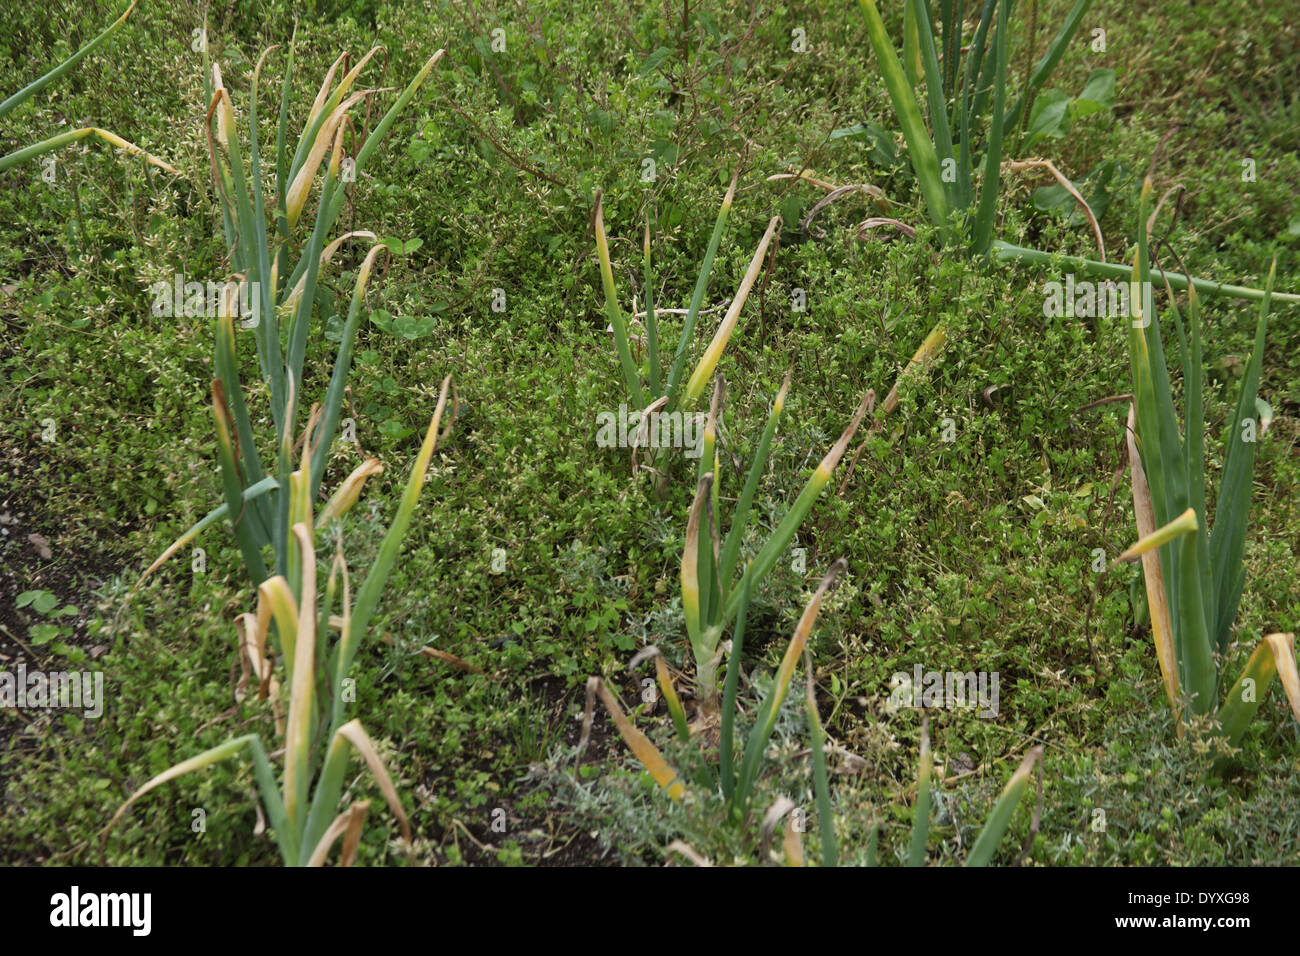 Ground cover annual weeds help to protect maturing onions Stock Photo